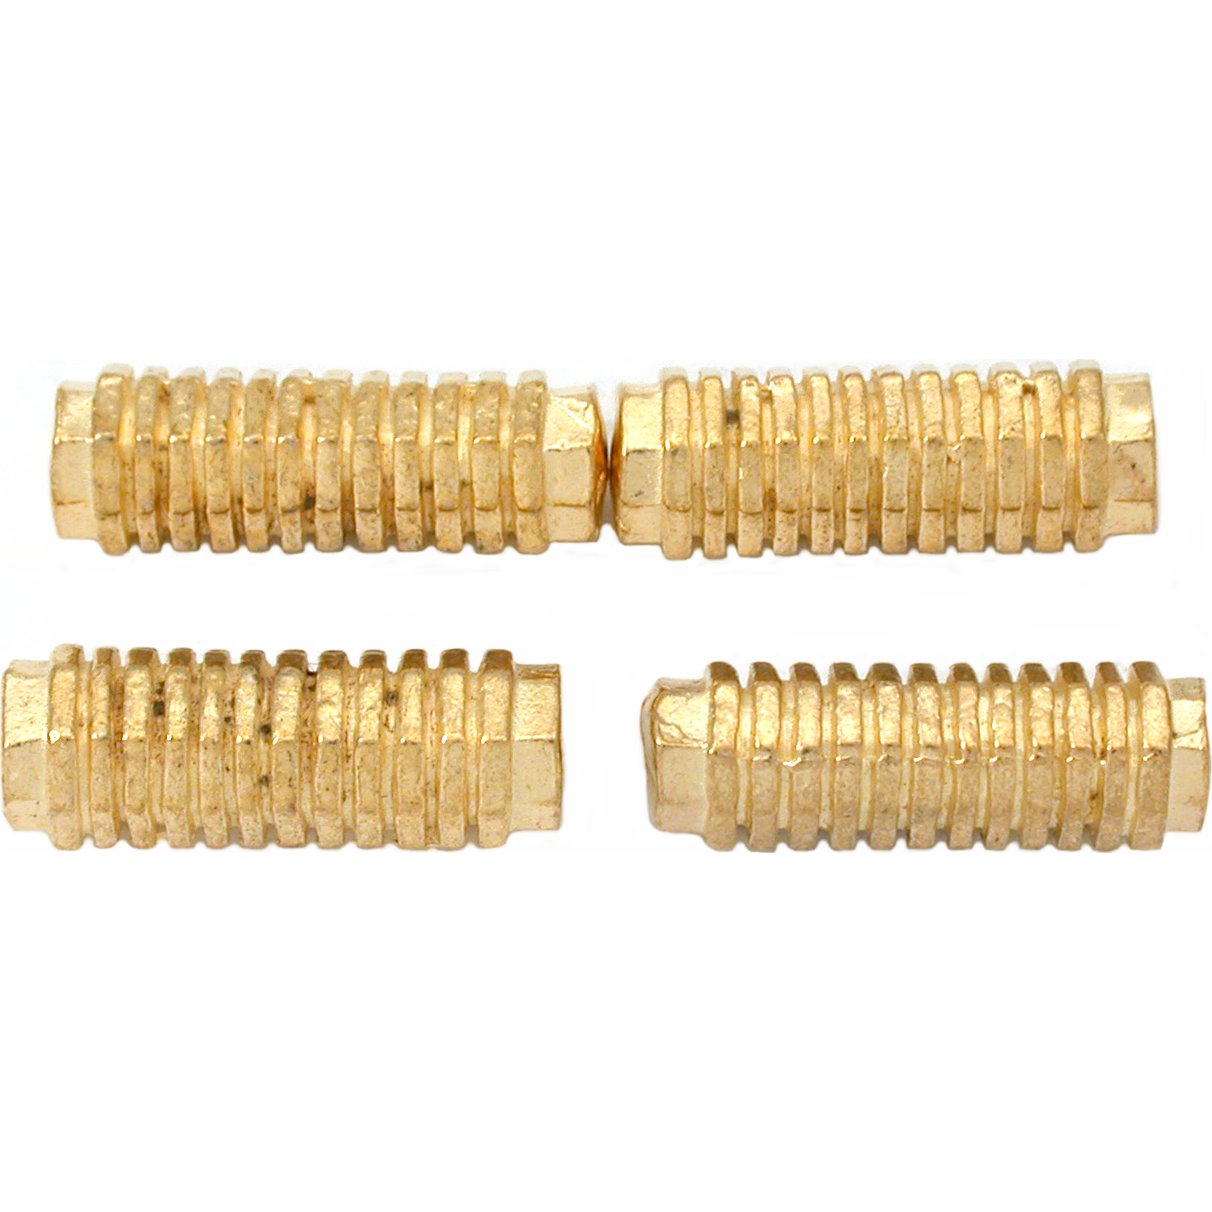 Bali Octagon Tube Gold Plated Beads 20mm 15 Grams 4Pcs Approx.